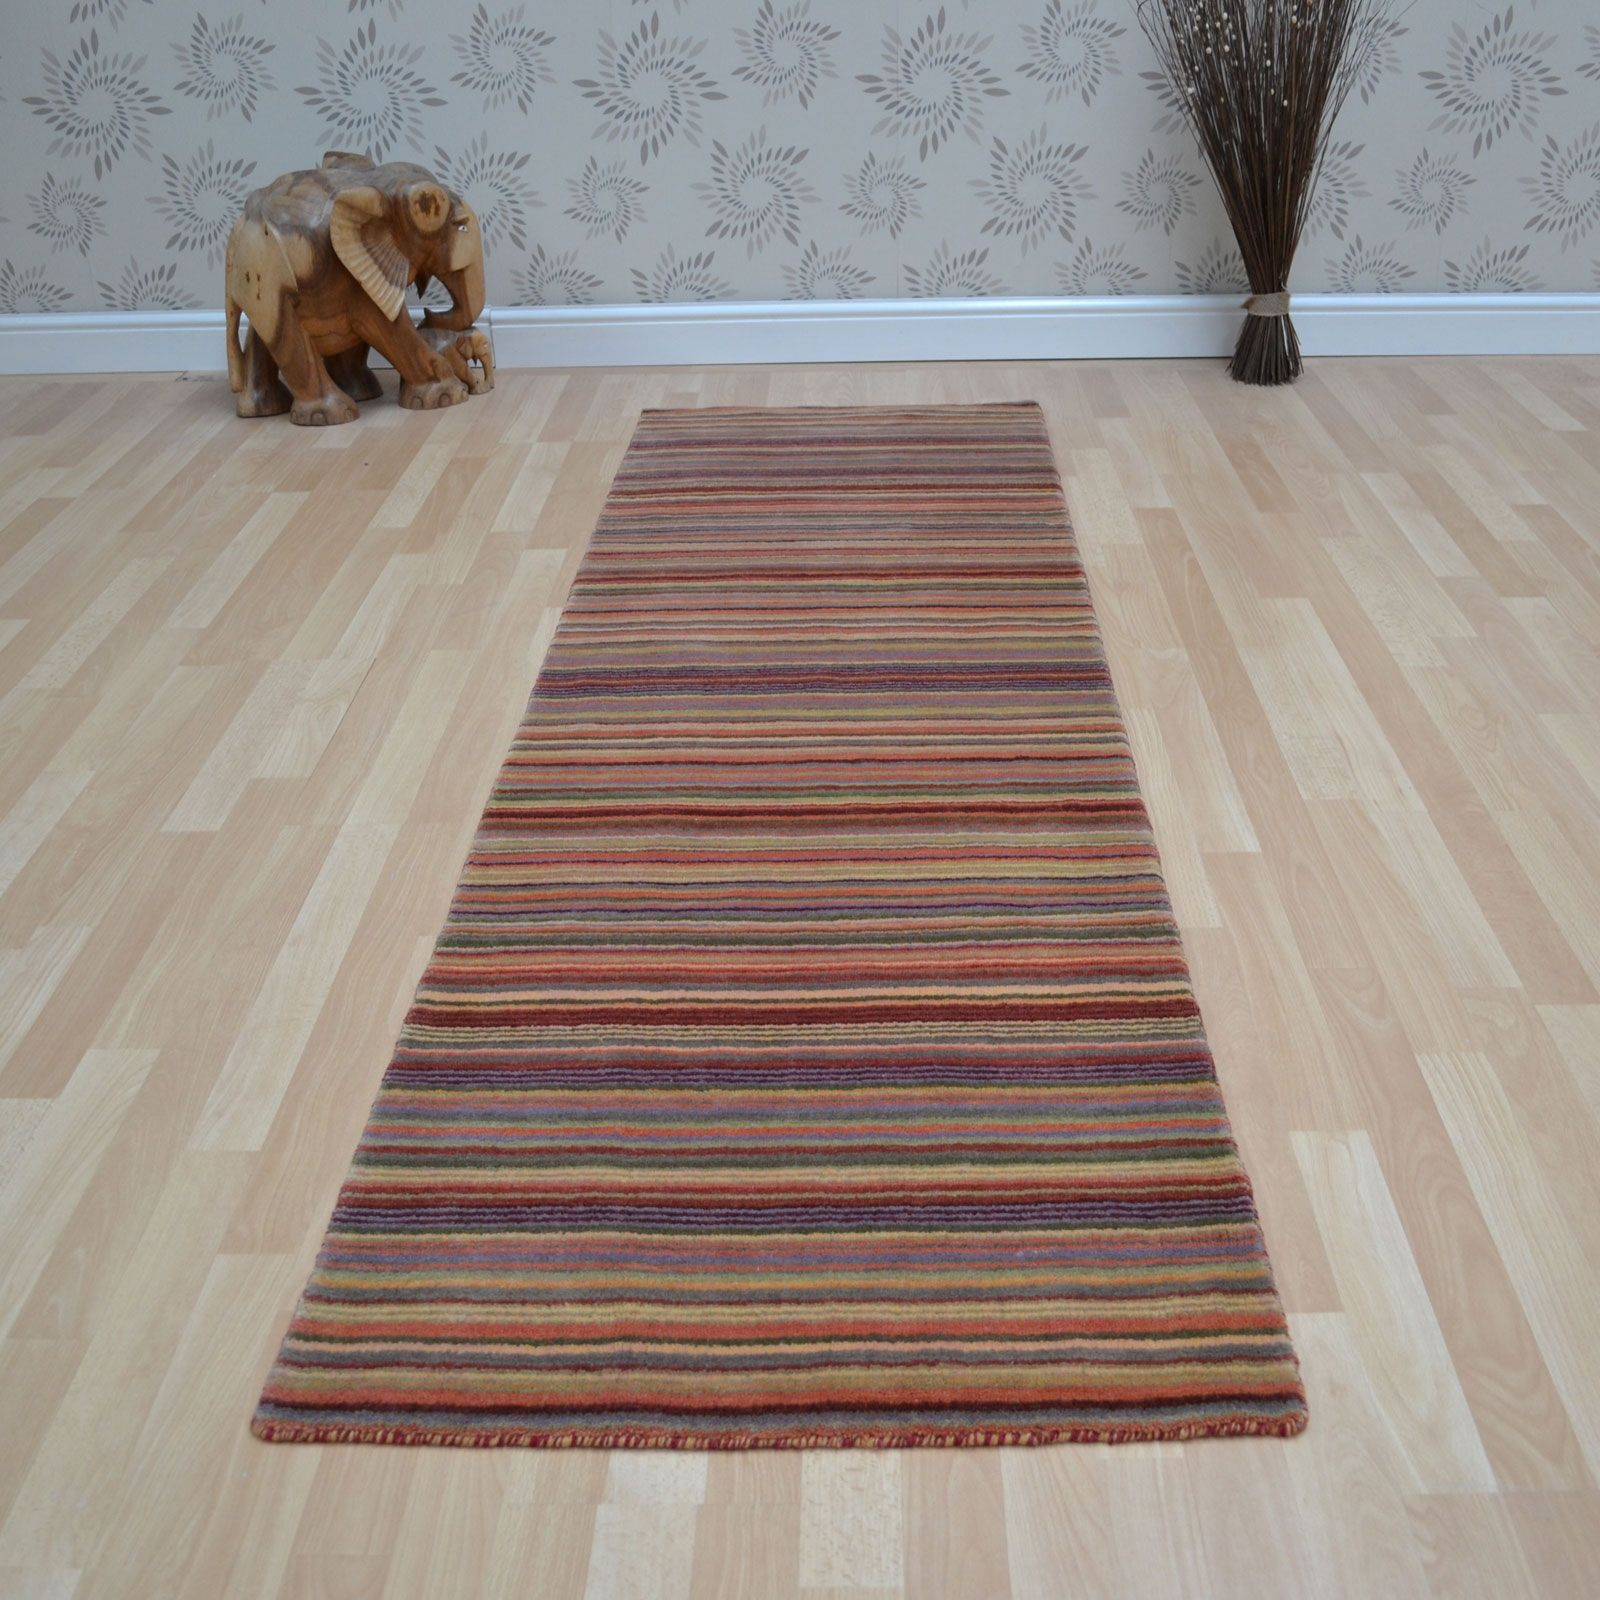 Hallway Runners Find The Best Hall Rug For Your Home In Hallway Rug Runner For Long Hallway 